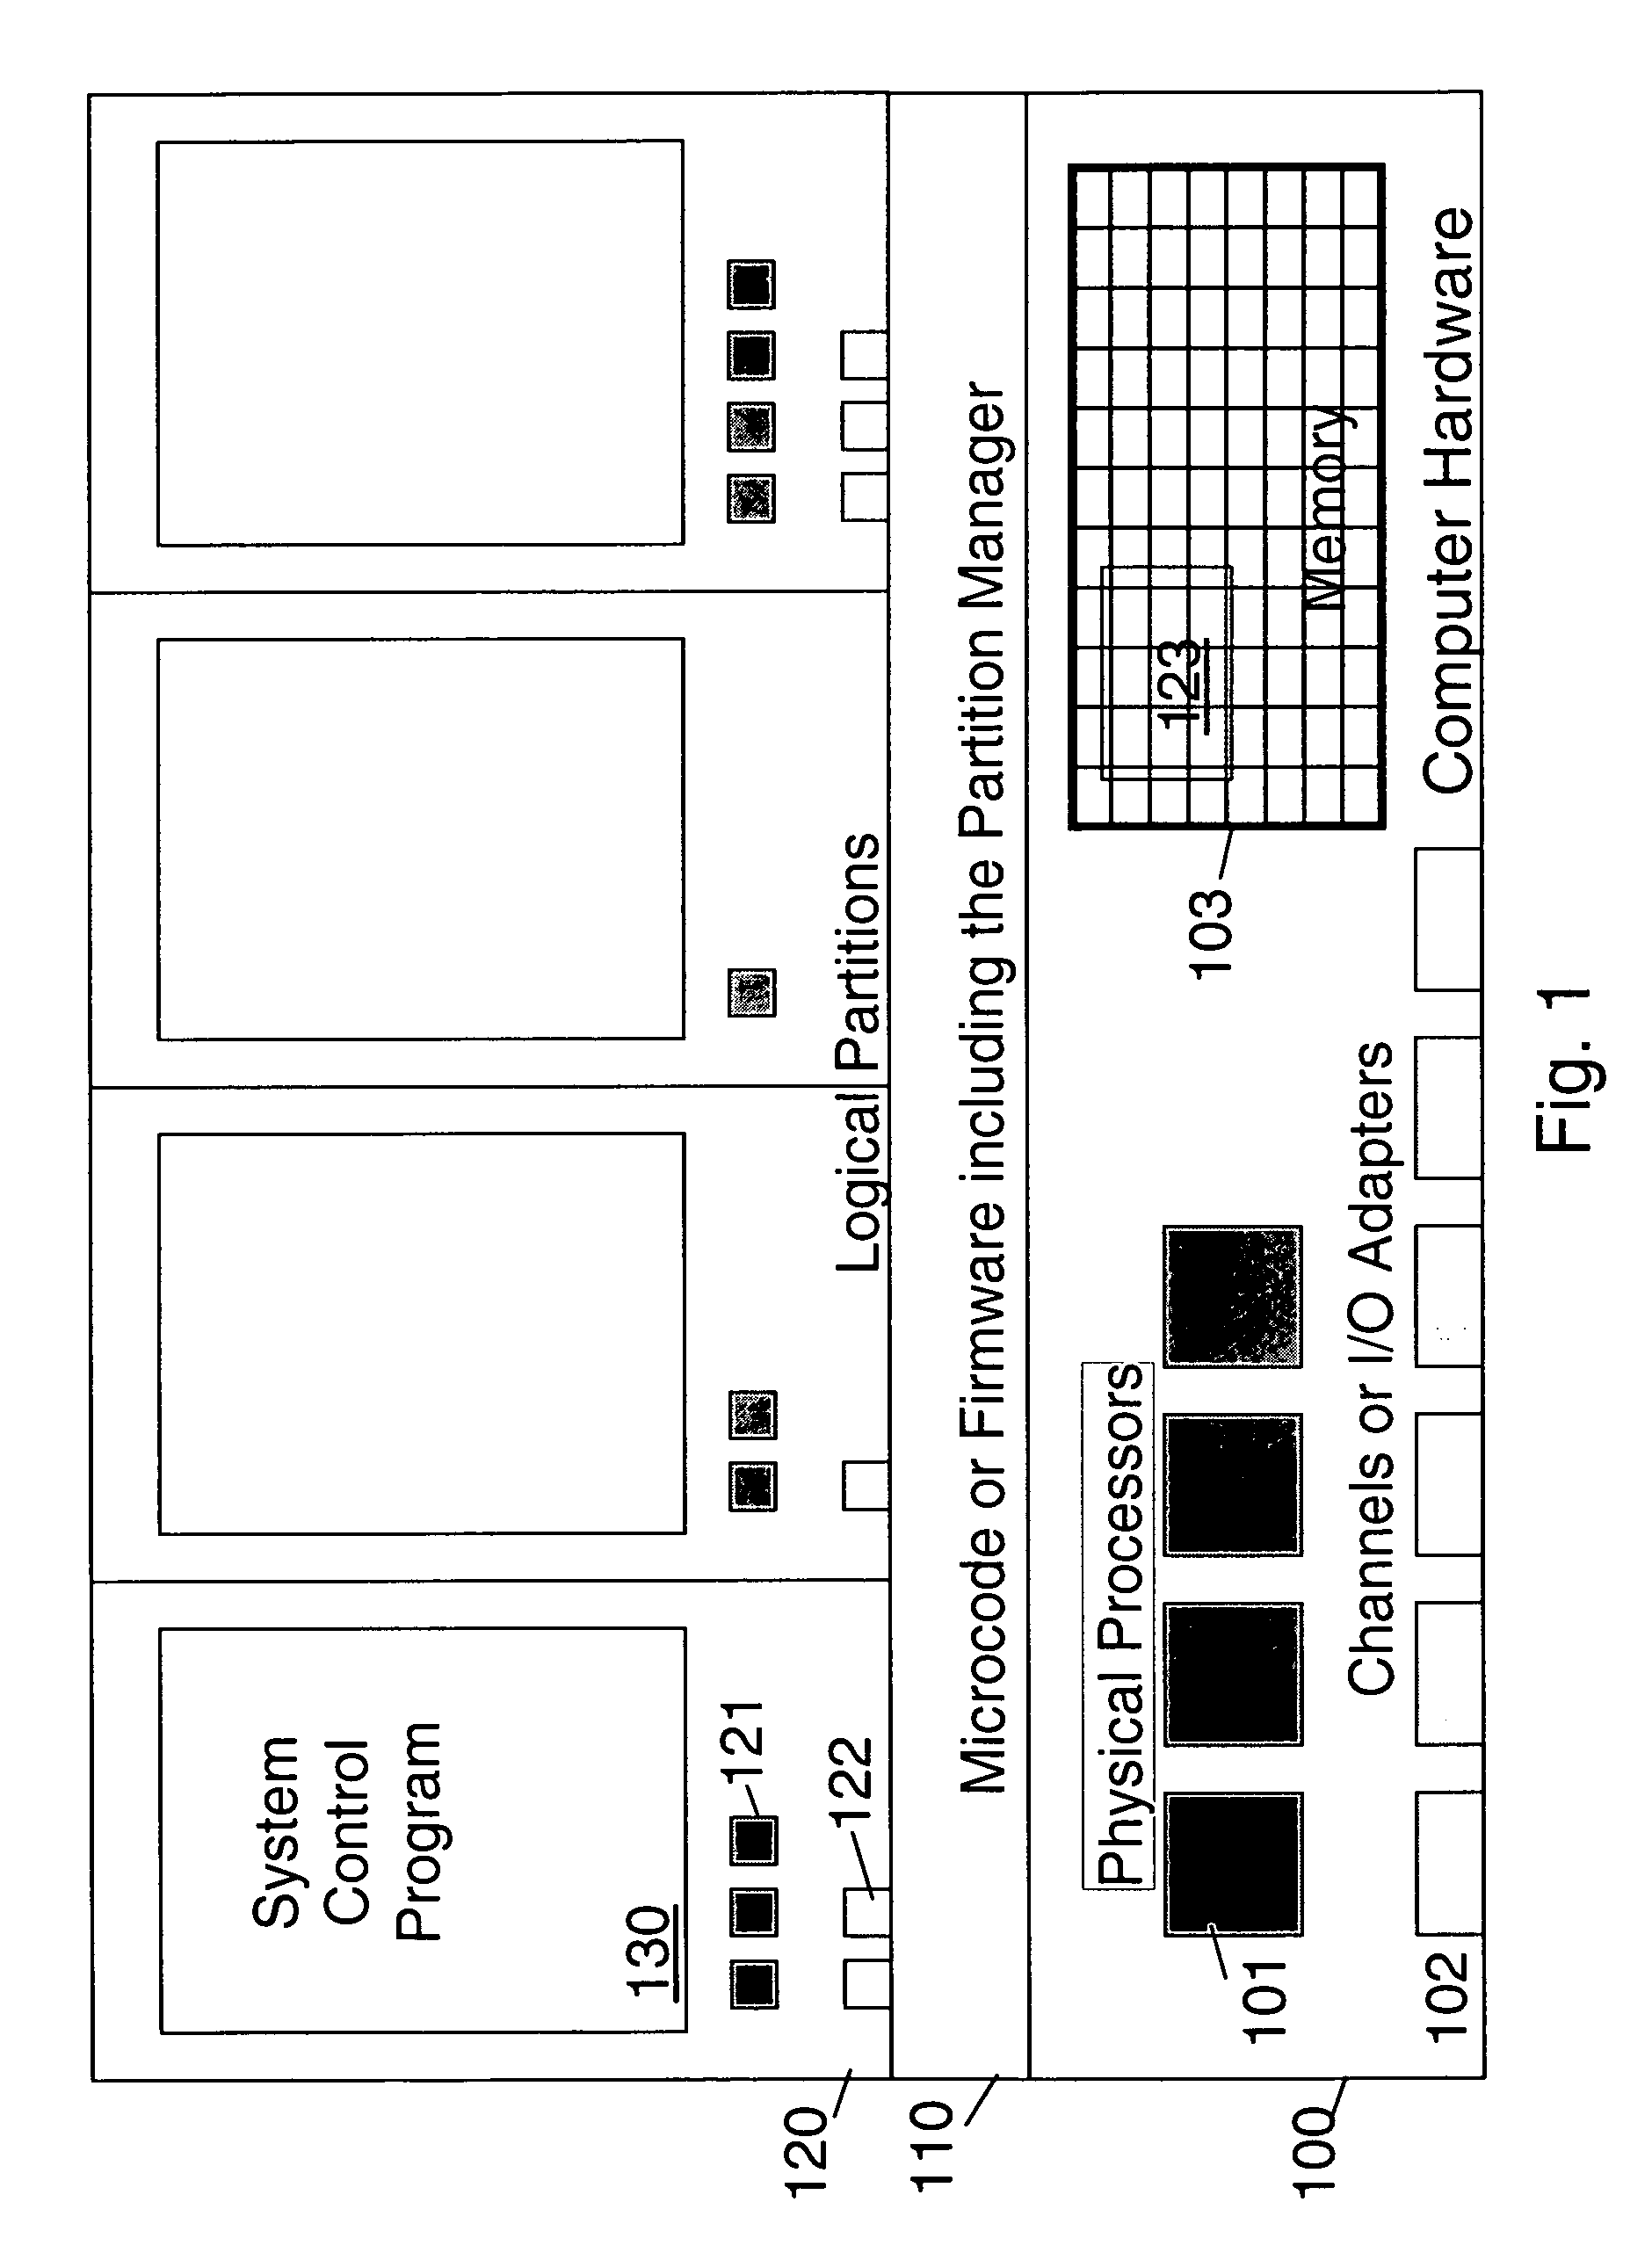 Method for controlling the capacity usage of a logically partitioned data processing system